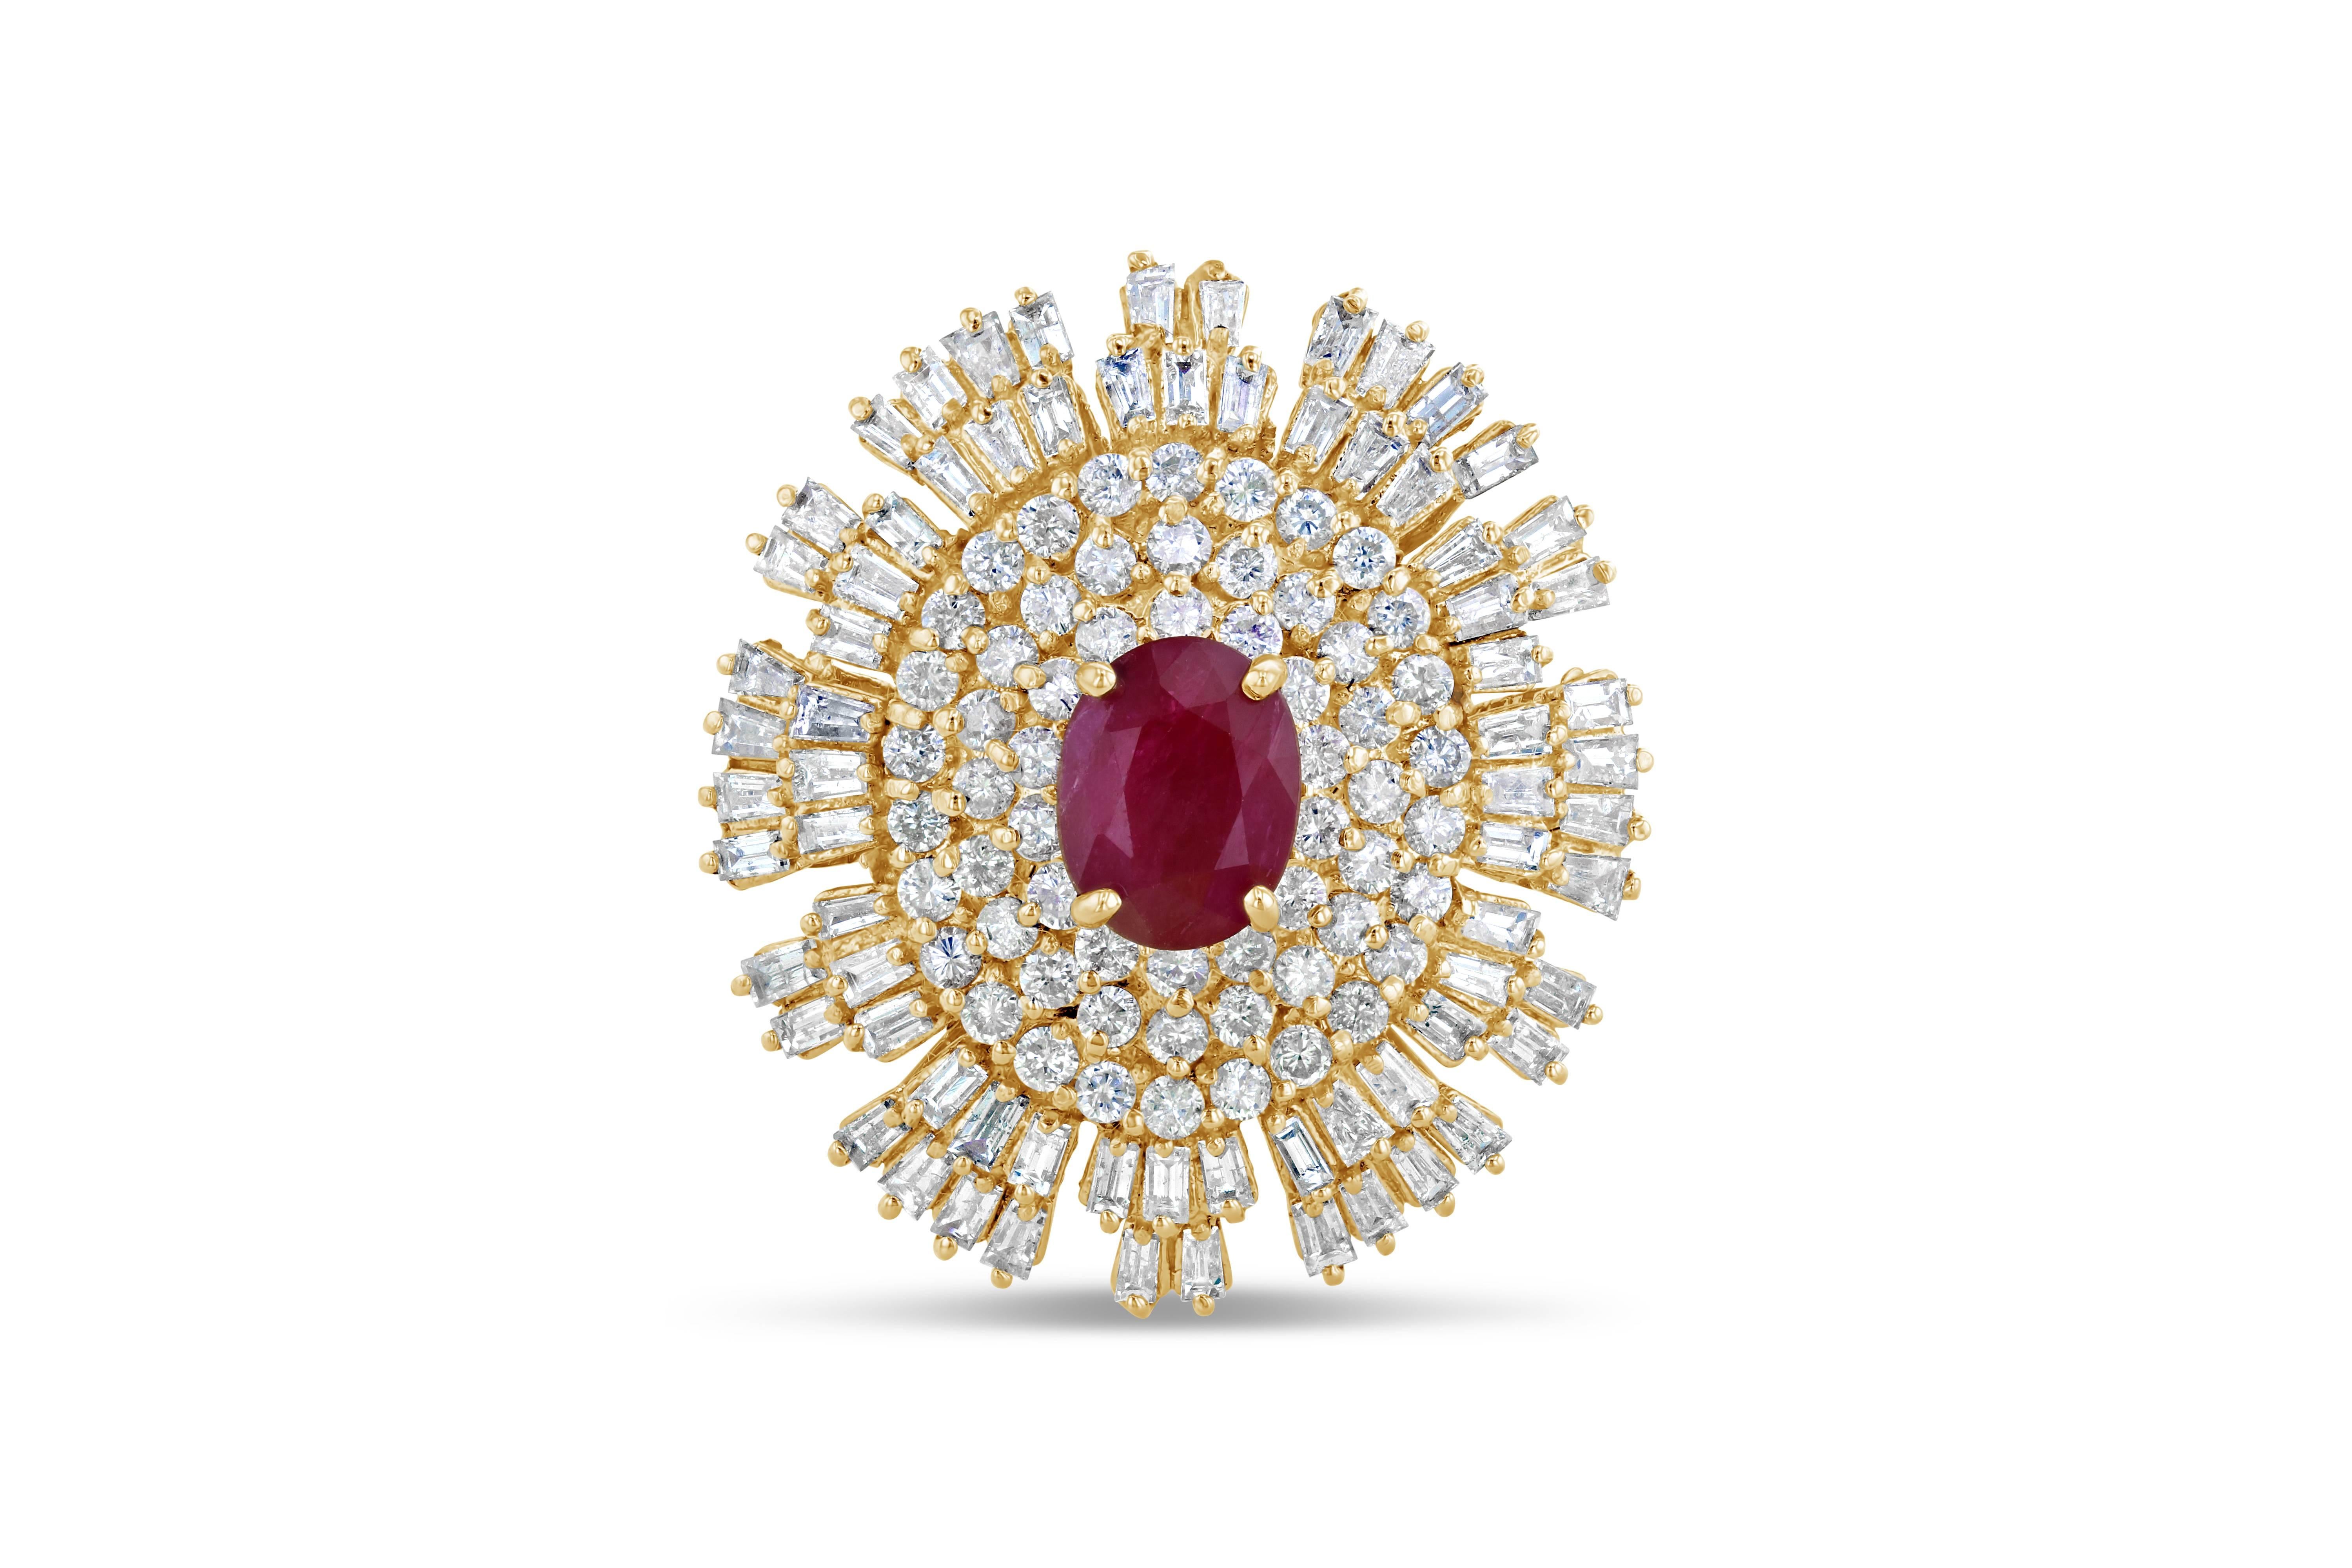 This gorgeous Ruby Diamond Ballerina Ring has round and baguette cut diamonds floating around the center Ruby just like a charming ballerina would! The Ruby is 2.31 Carats surrounded by 60 Round Cut Diamonds that weigh 1.63 Carats, and 72 Baguette